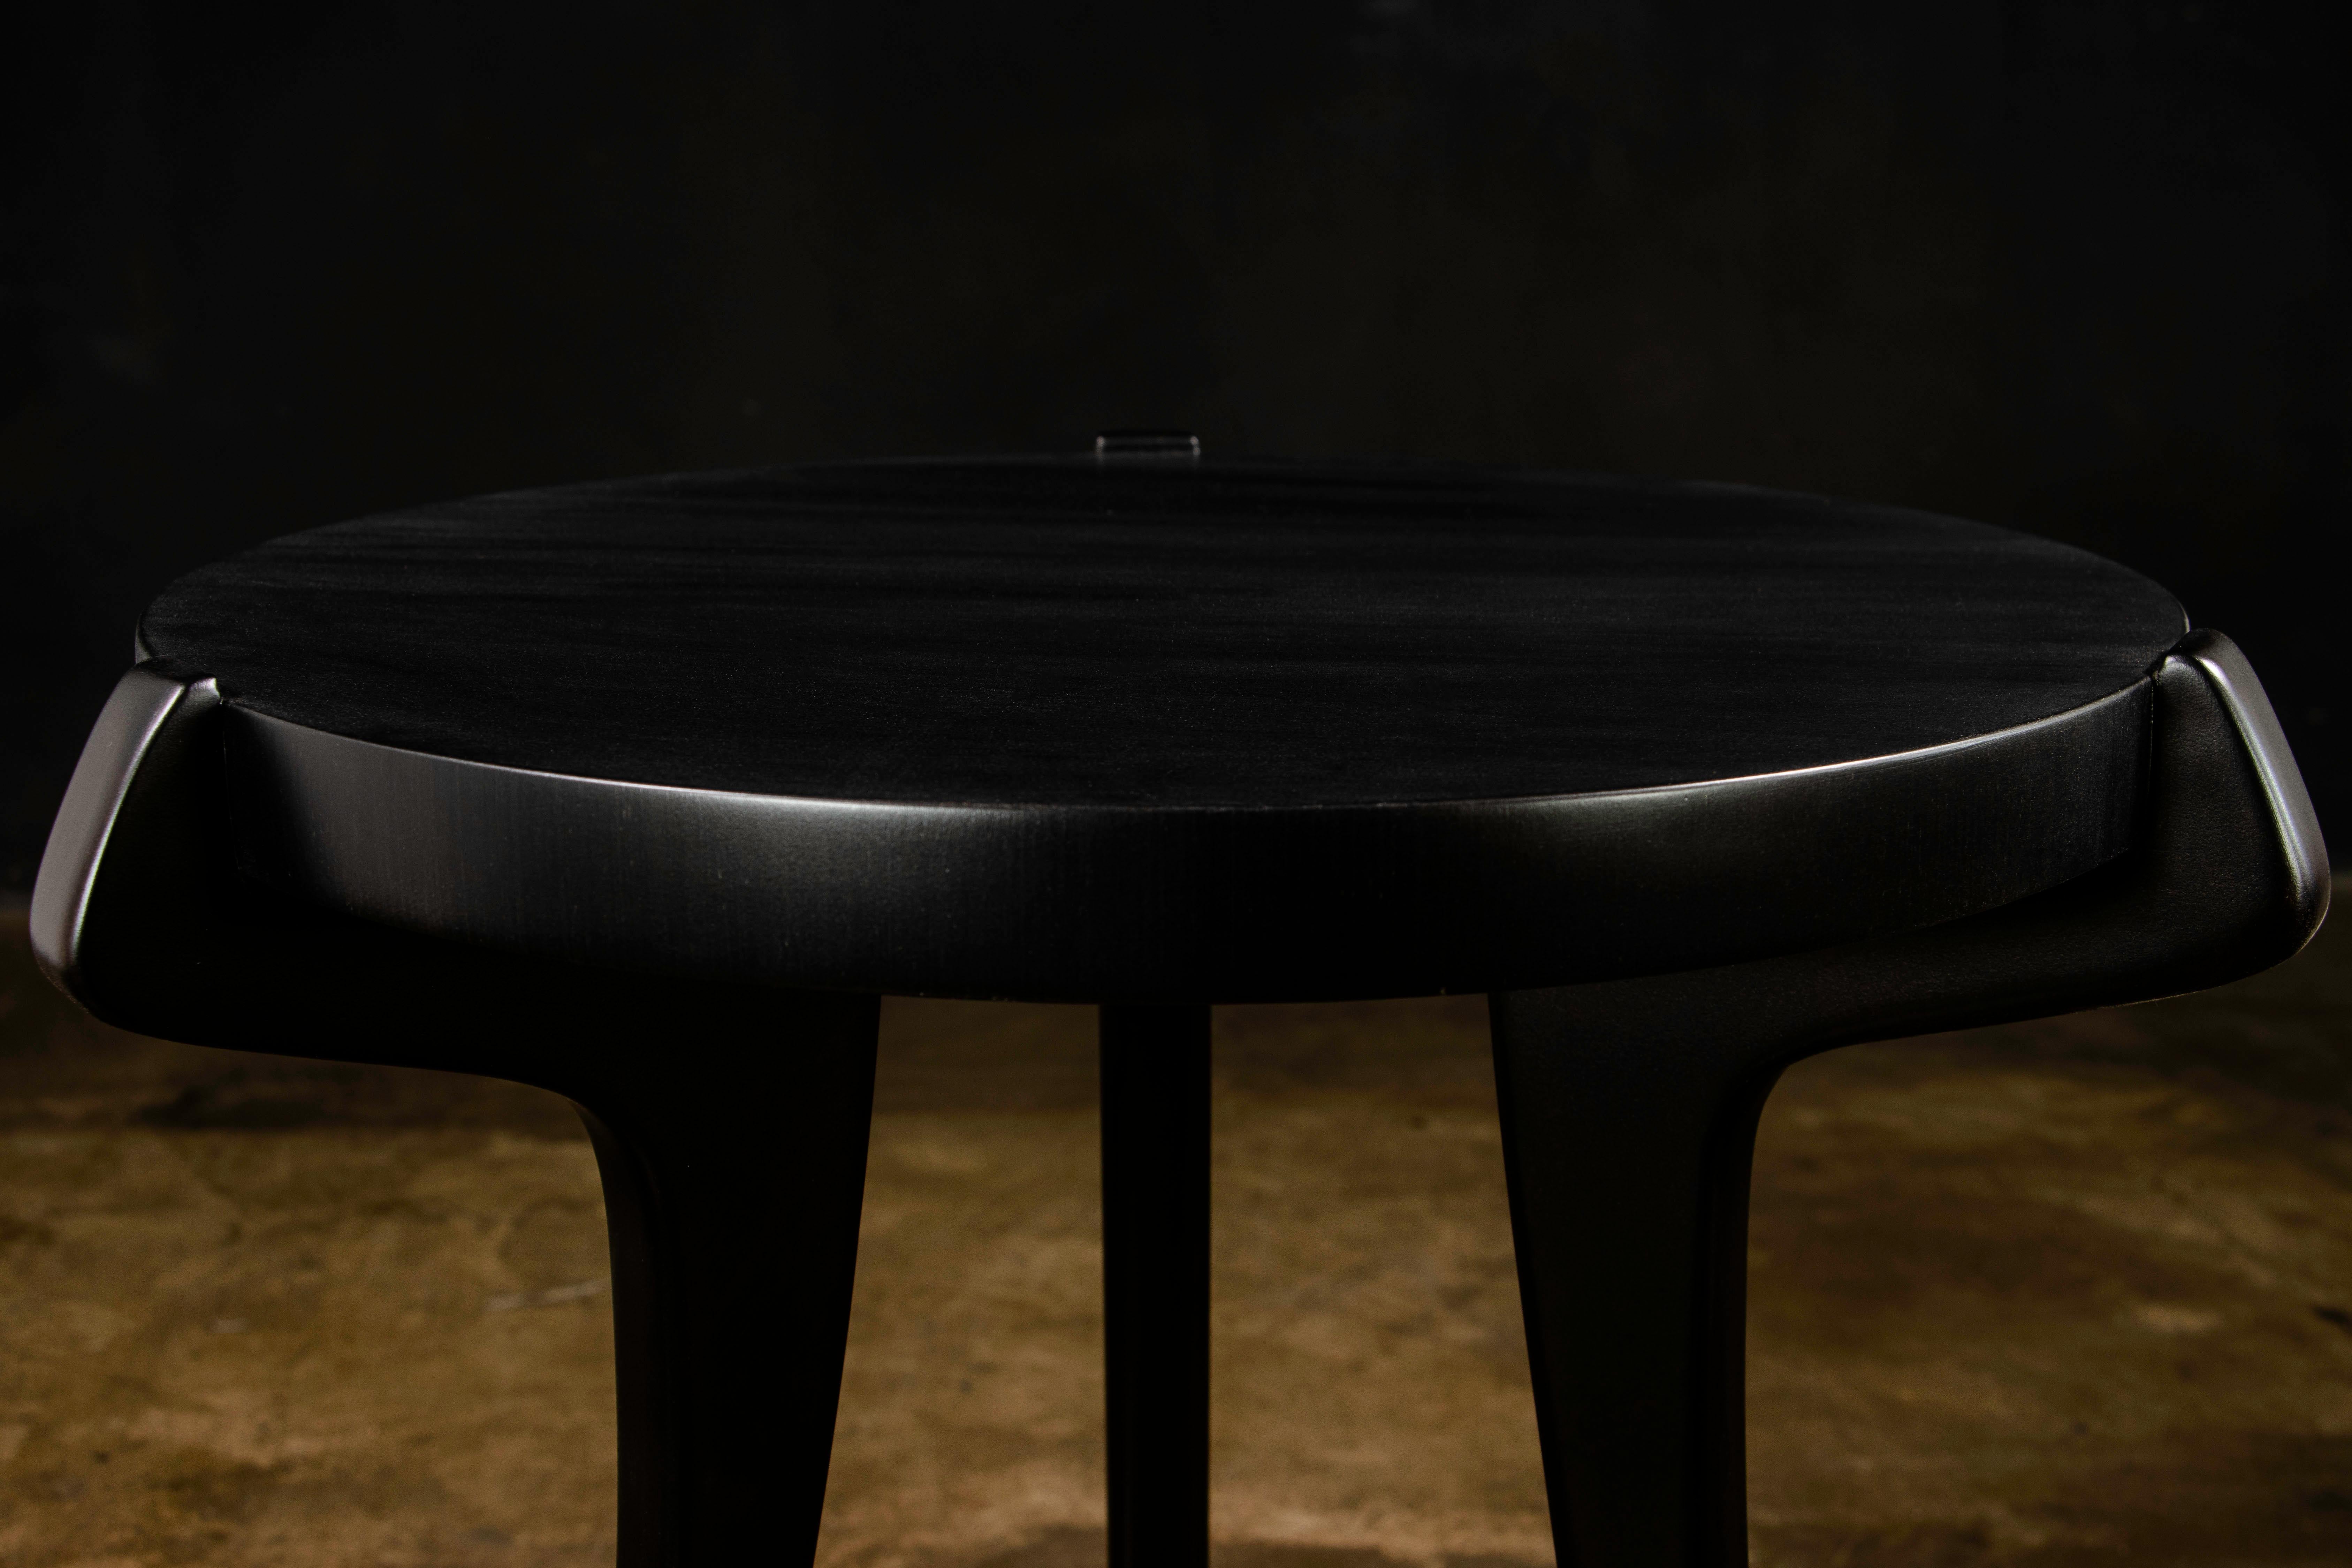 Sabre Legged Modern Round Side Cocktail Table in Ebony from Costantini, Uccello For Sale 2